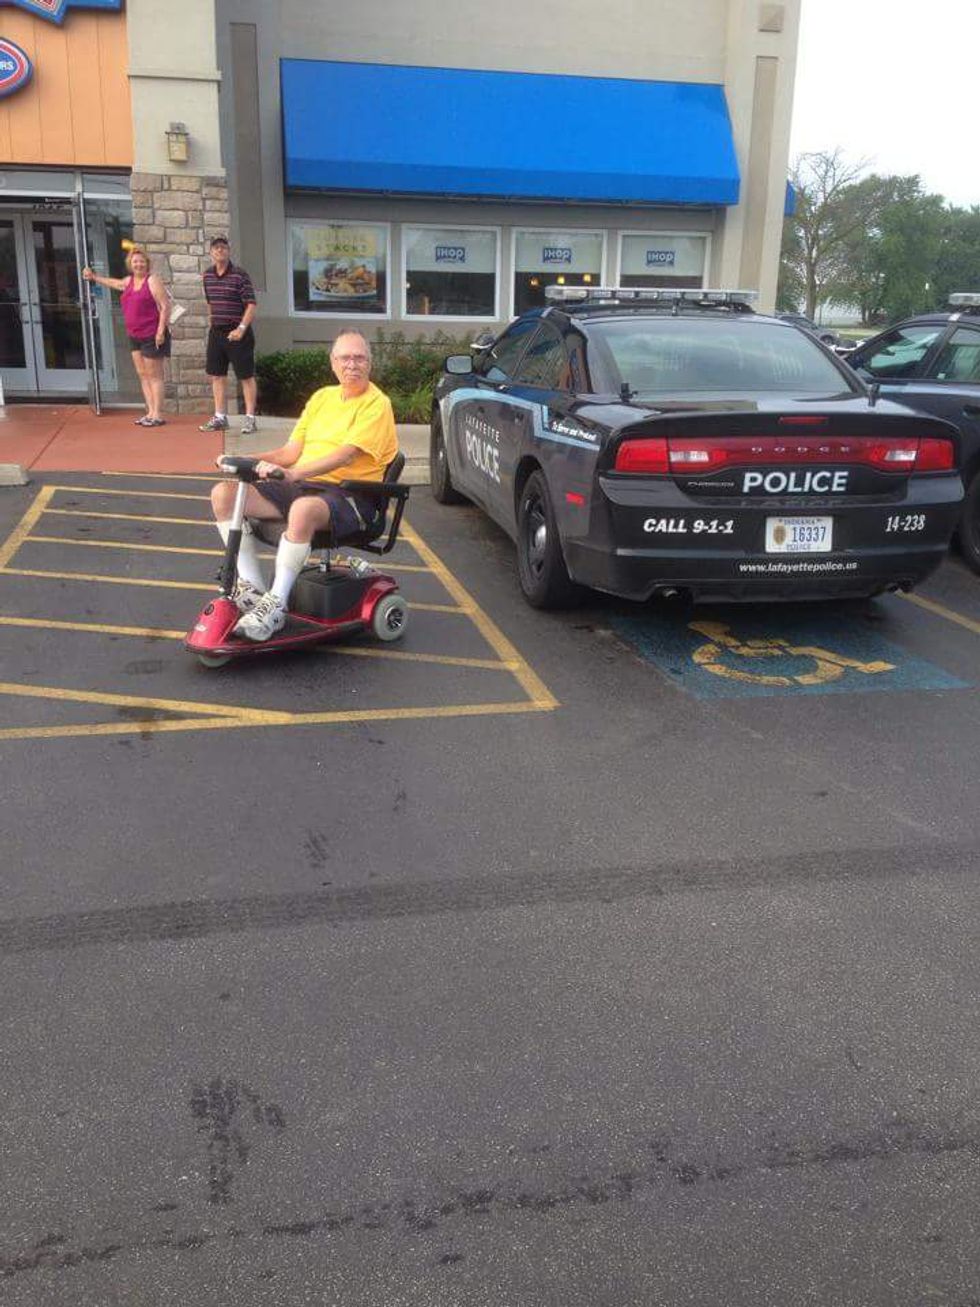 Once You See Where This Police Officer Parked, You’ll Understand Why It Launched an Investigation